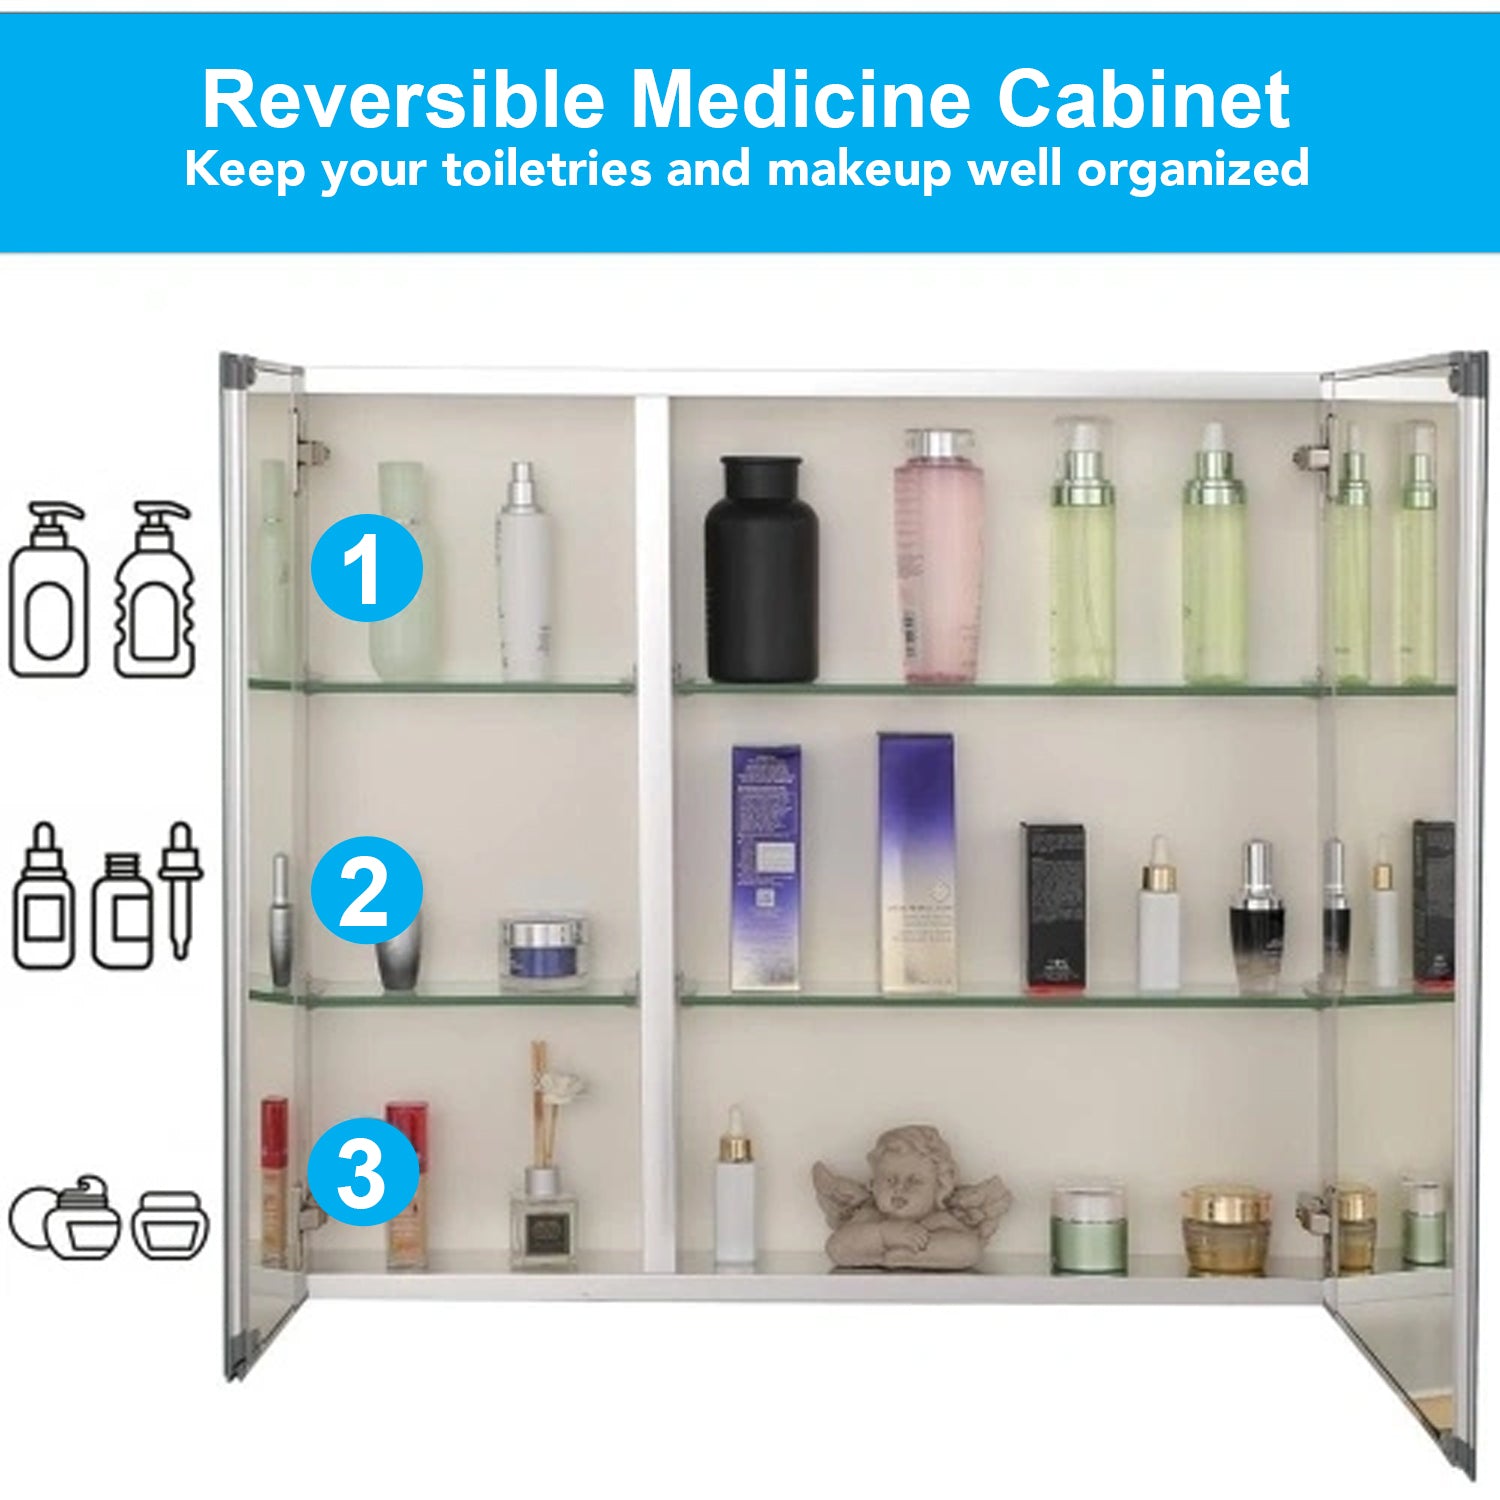 30 x 26 Inches Frameless Medicine Cabinet with Mirror, Double Sided Mirror, 2 Doors 3-Adjustable Shelves, Large&Small Door Design, Soft-Closing, Surface Mount or Recessed Medicine Cabinets for Bathroom, Bedroom, Hotel